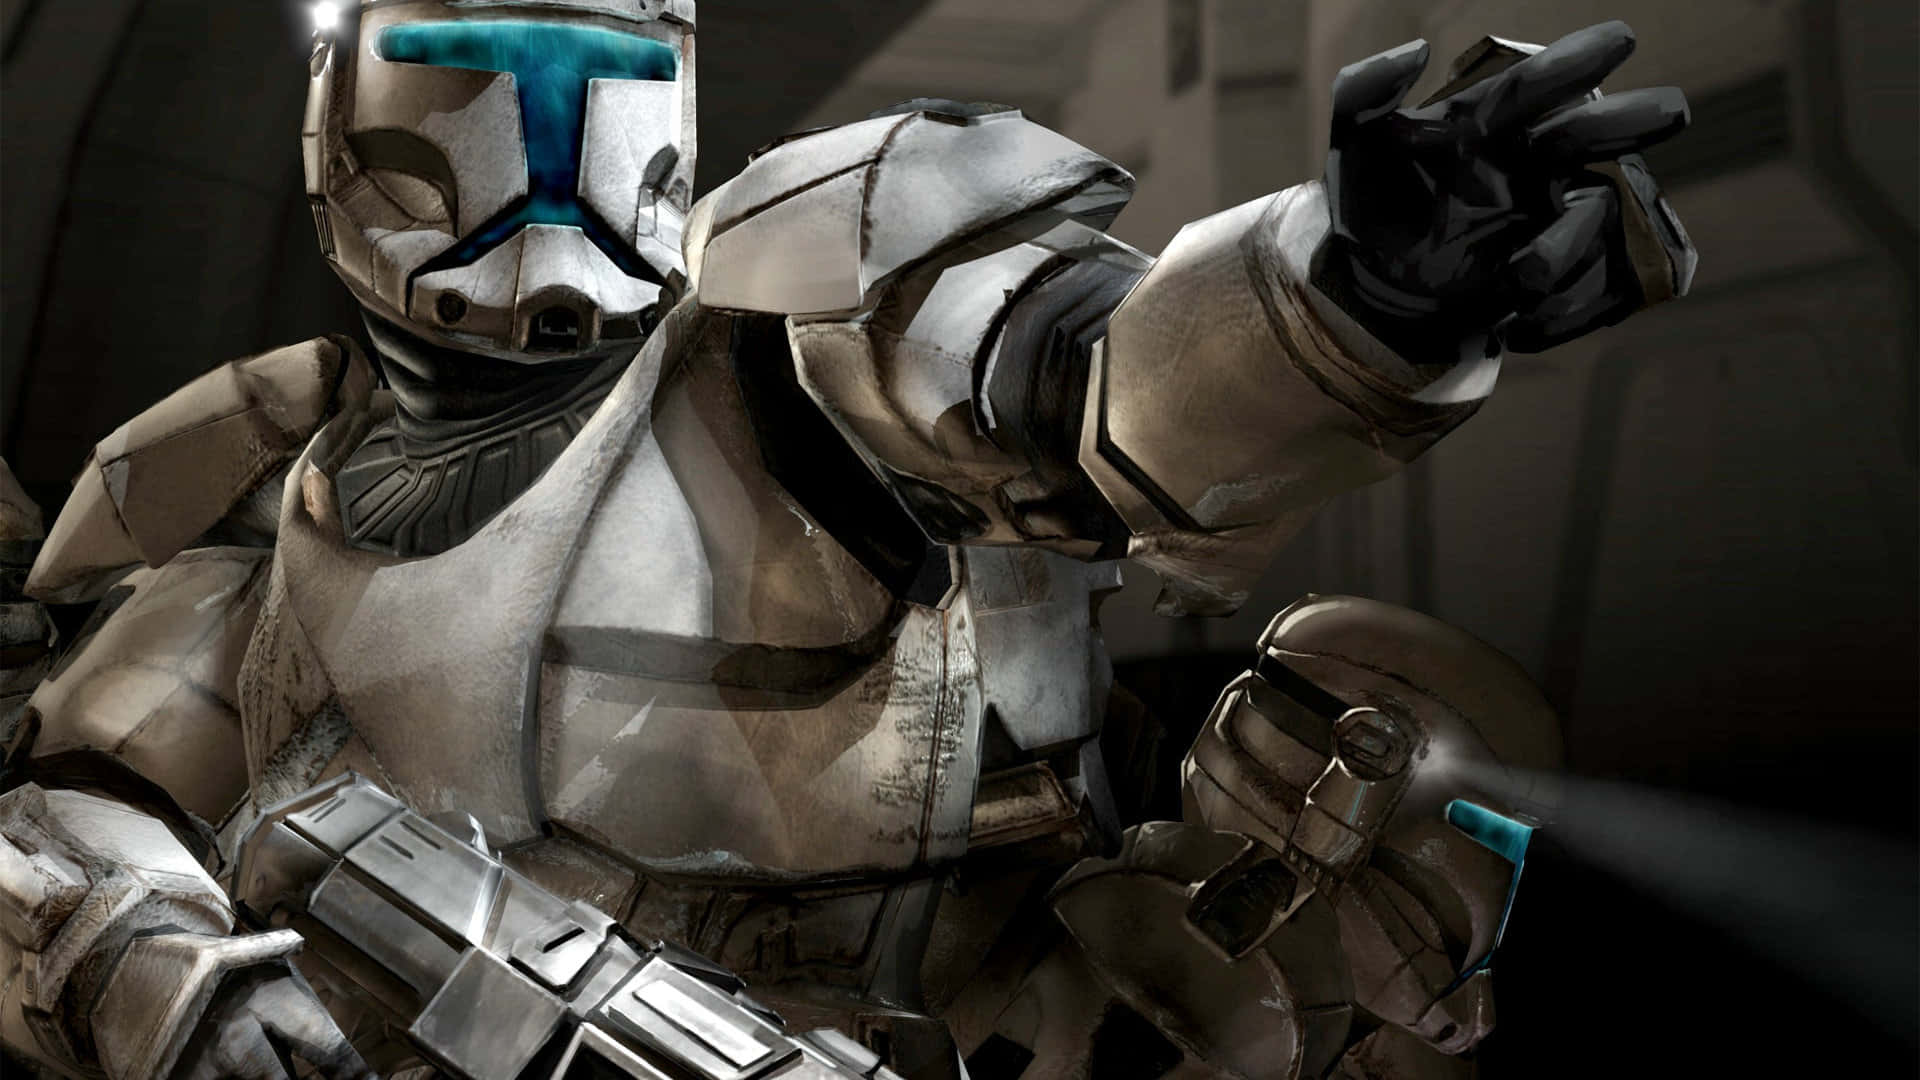 Join the Republic Commando squad and fight for the Galactic Republic! Wallpaper